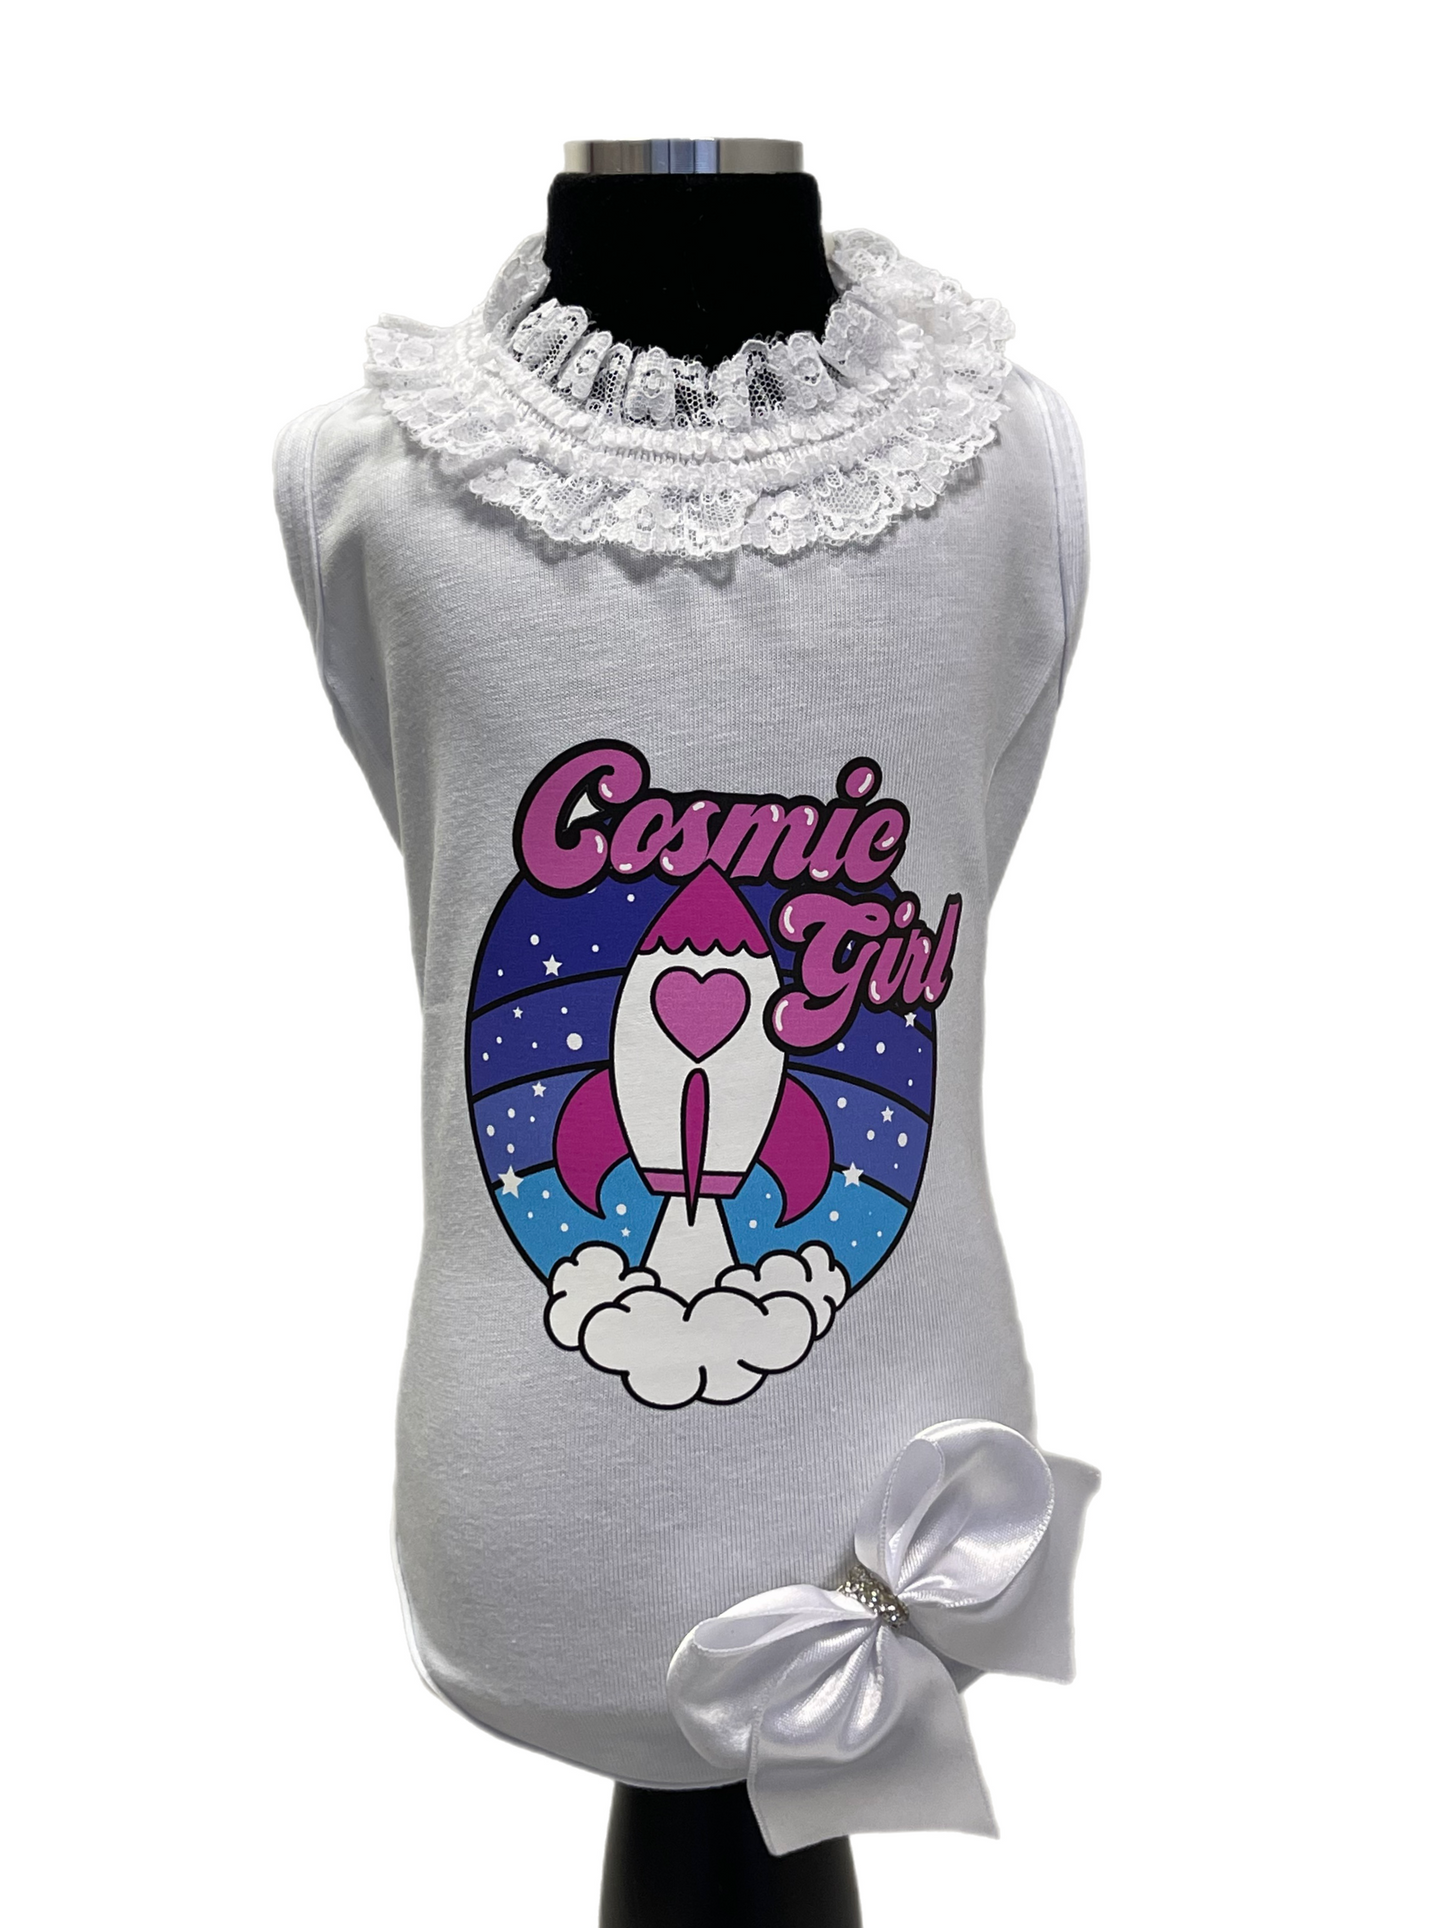 COSMIC GIRL T-Shirt for Casual Chic Dogs. Dog clothing handmade in Italy.